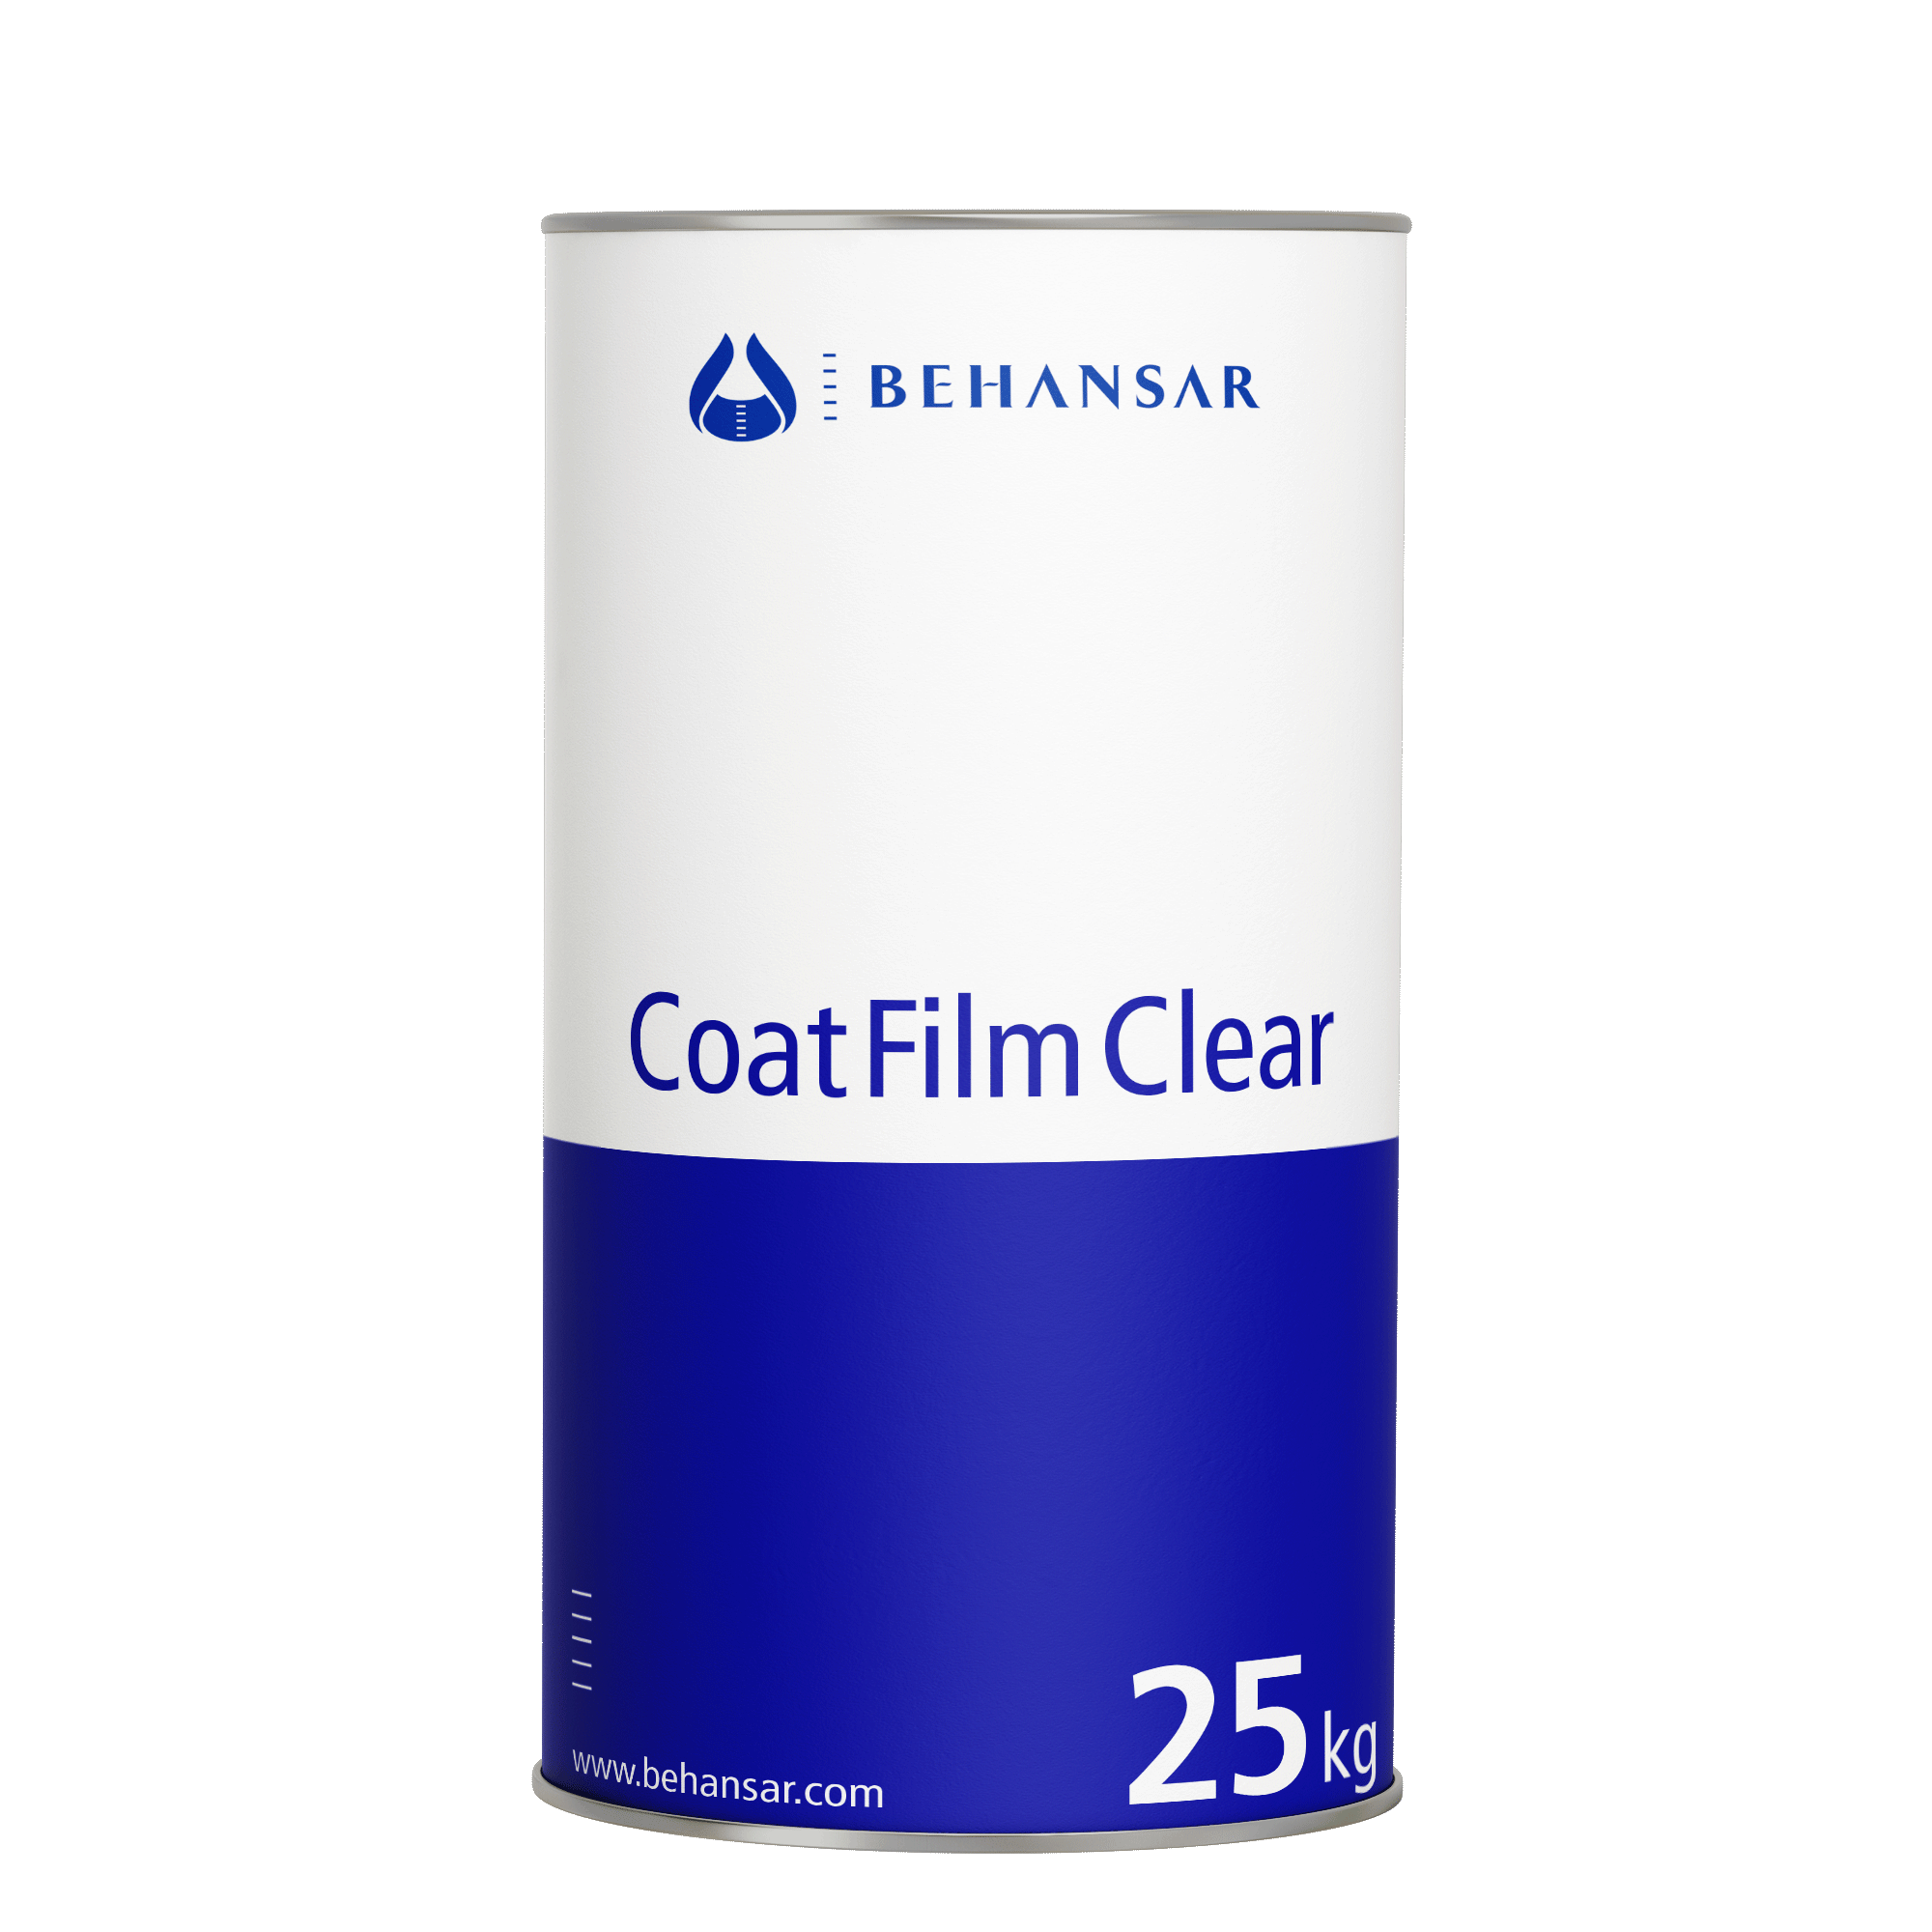 Coat Film Clear is one of the products of Behansar Co